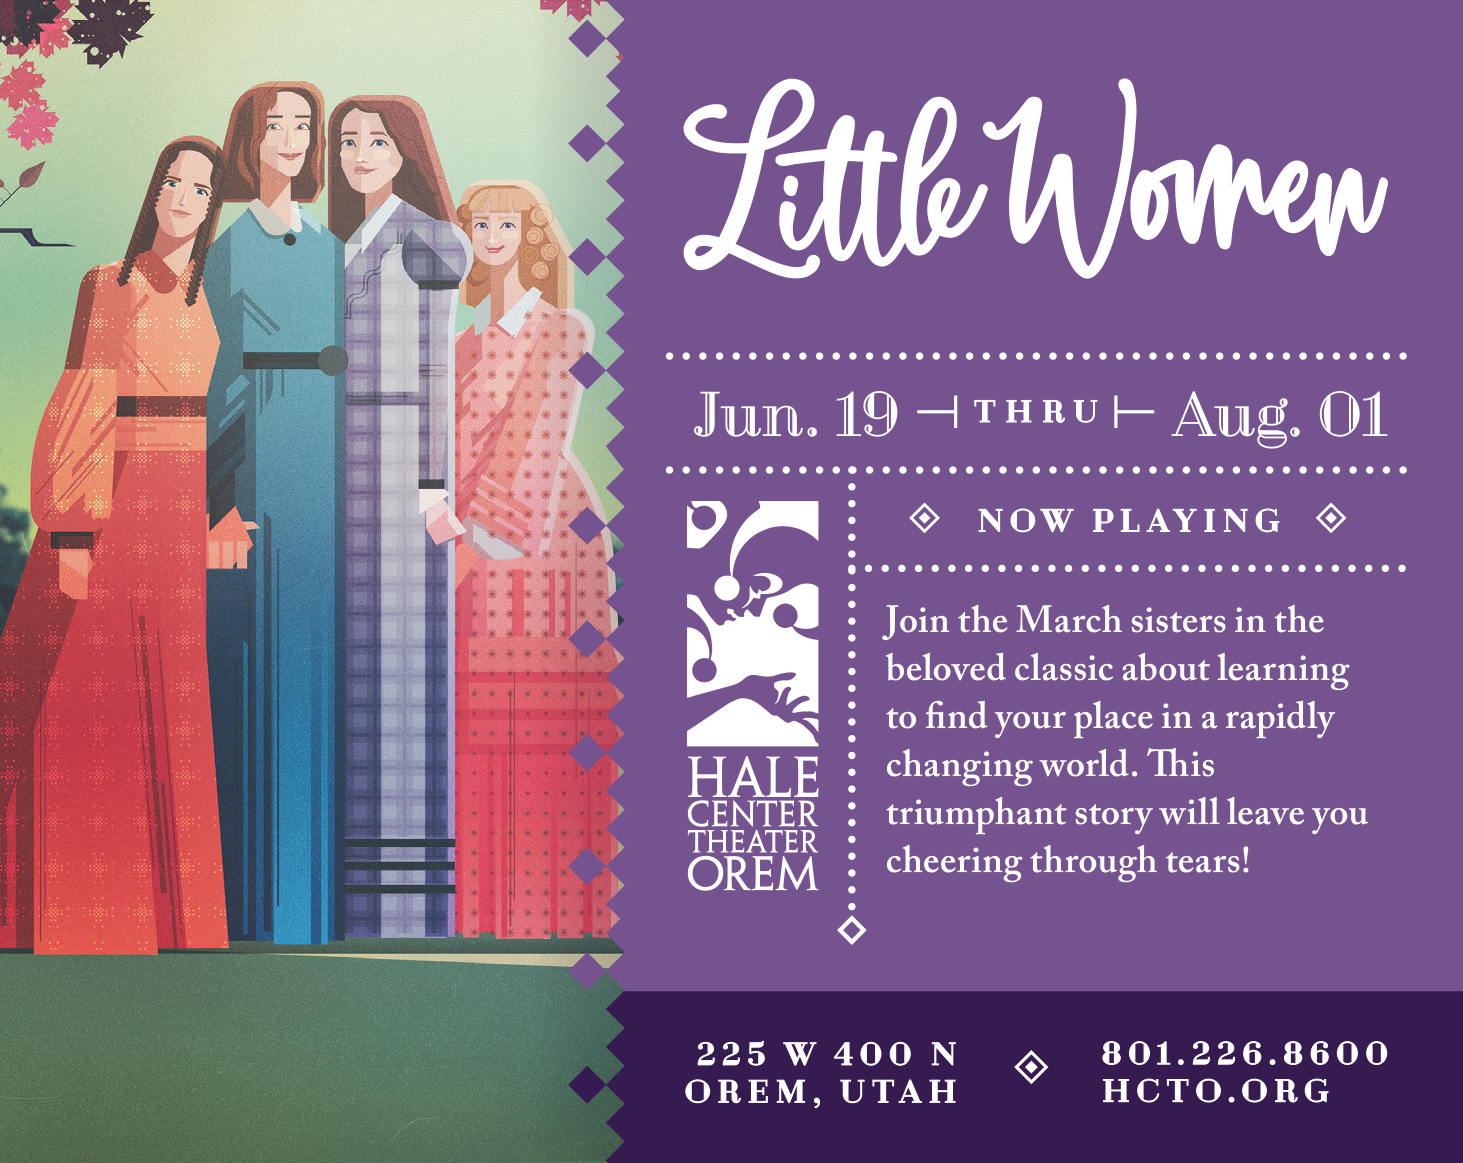 Ads HCTO Little Women Mary Poppins